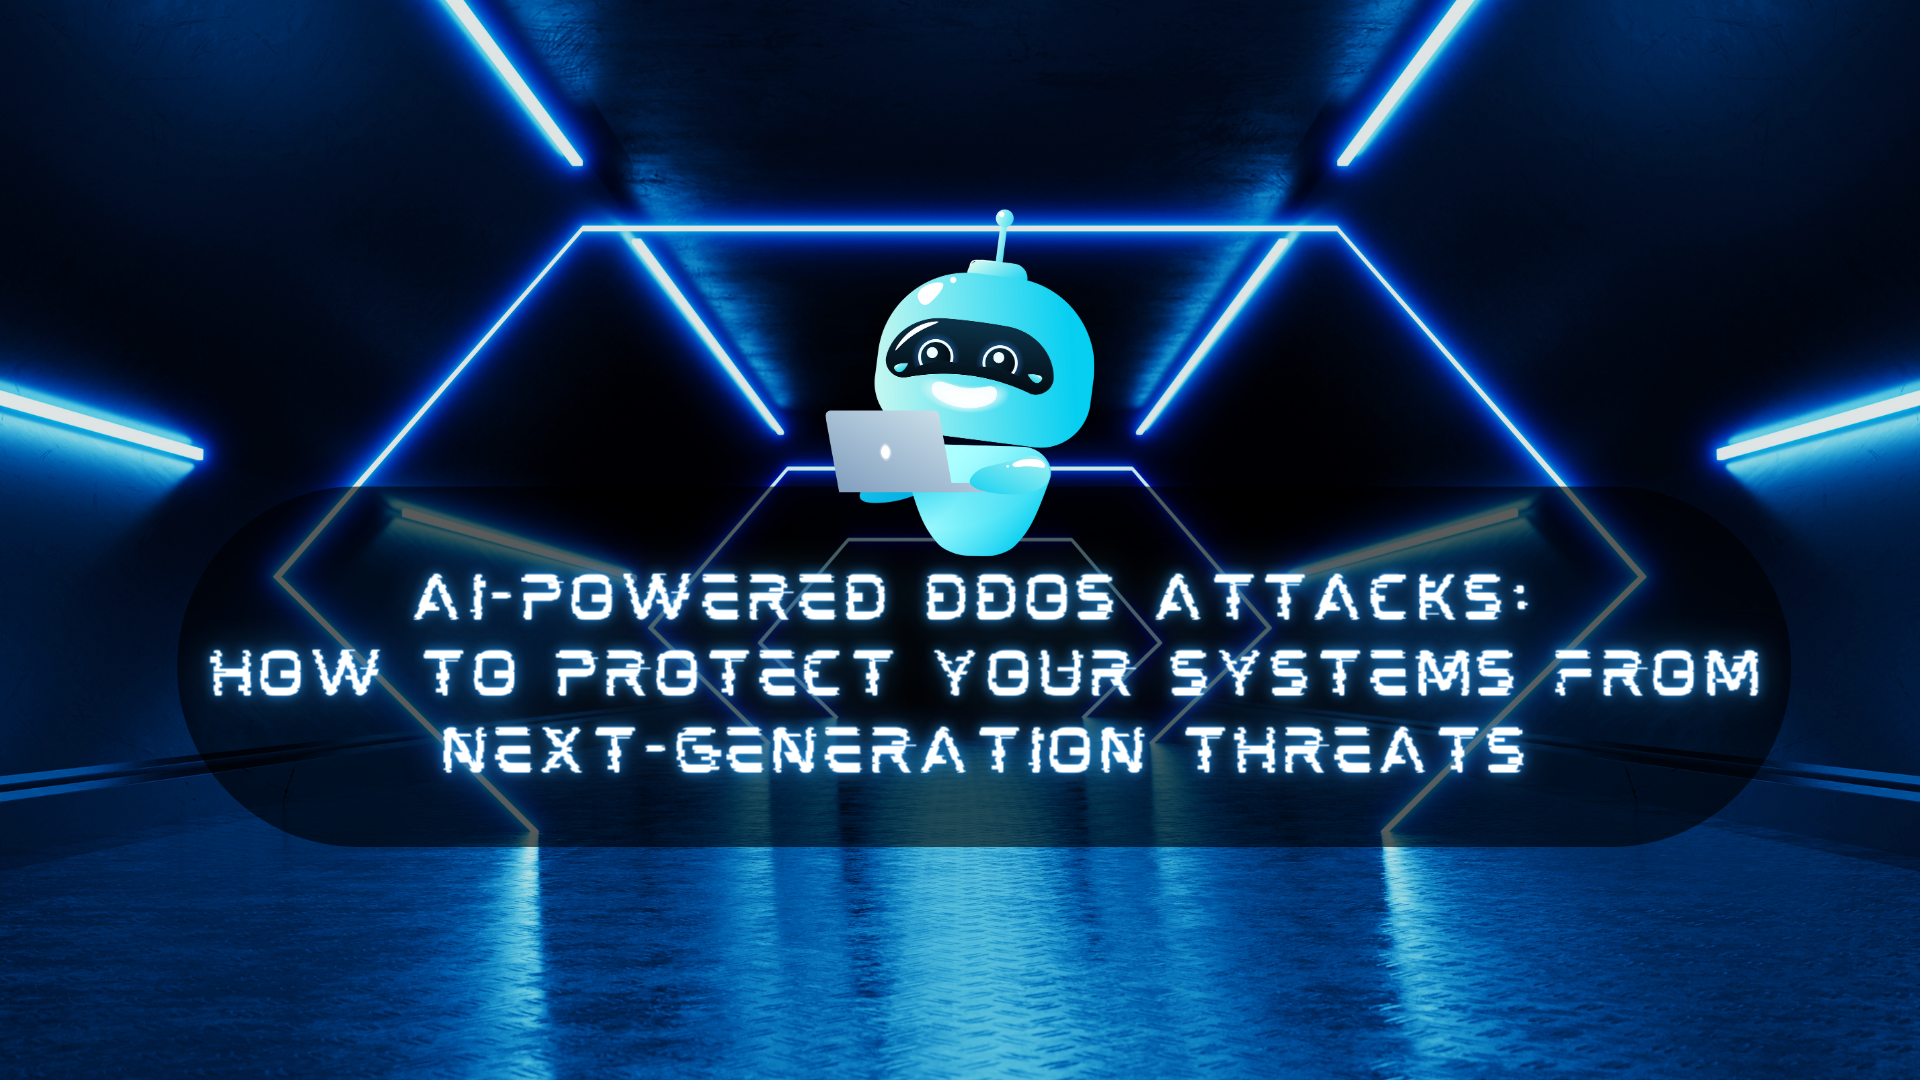 AI-Powered DDoS Attacks How to Protect Your Systems from Next-Generation Threats